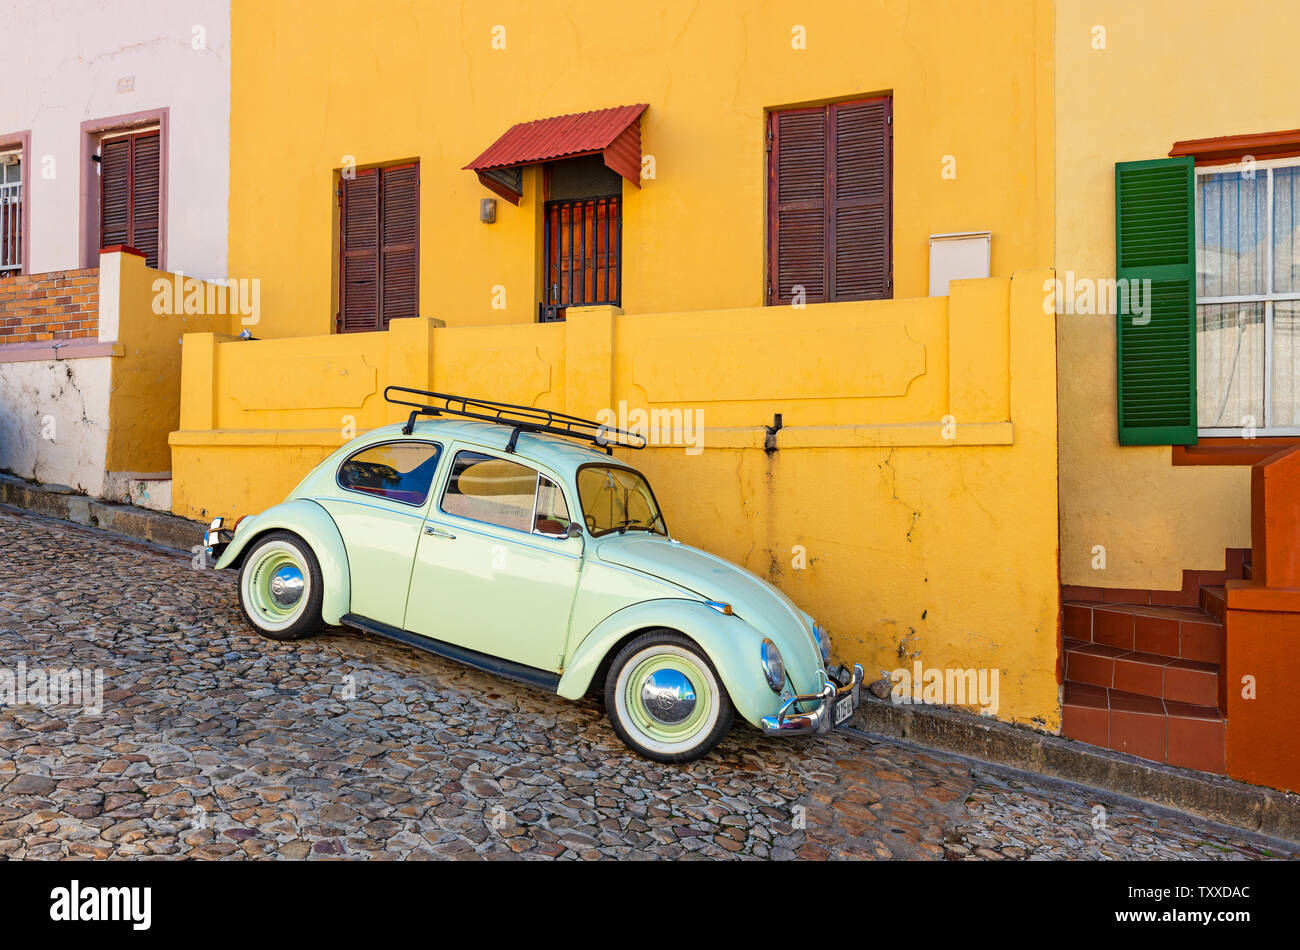 An old renovated vintage car or old timer in a colourful street with orange facade of Bo Kaap district in Cape Town, South Africa. Stock Photo